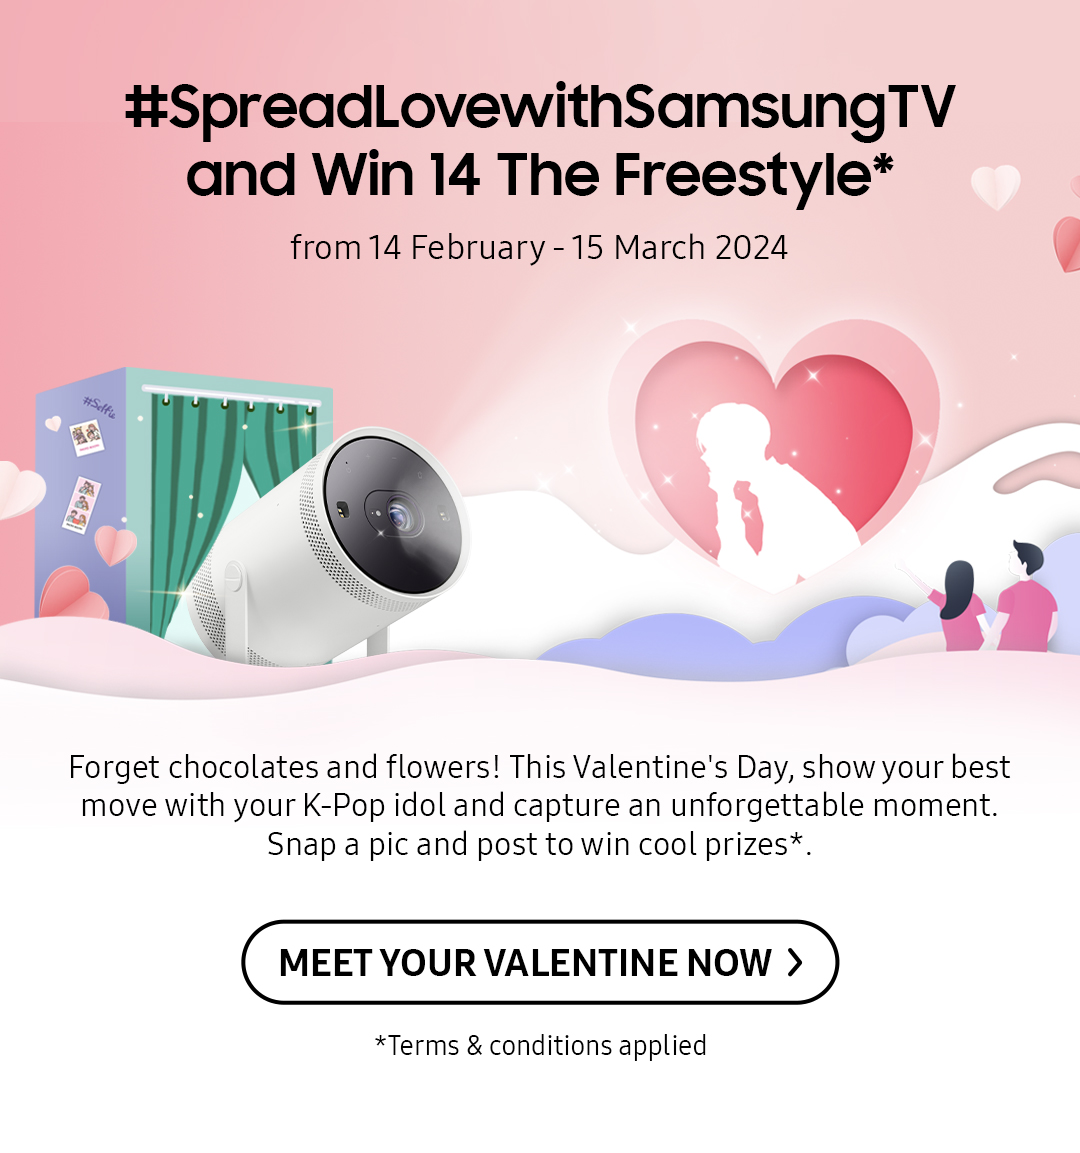 #SpreadLovewithSamsungTV and Win 14 The Freestyle* | Forget chocolates and flowers! This Valentine's Day, show your best move with your K-Pop idol and capture an unforgettable moment. Snap a pic and post to win cool prizes*.